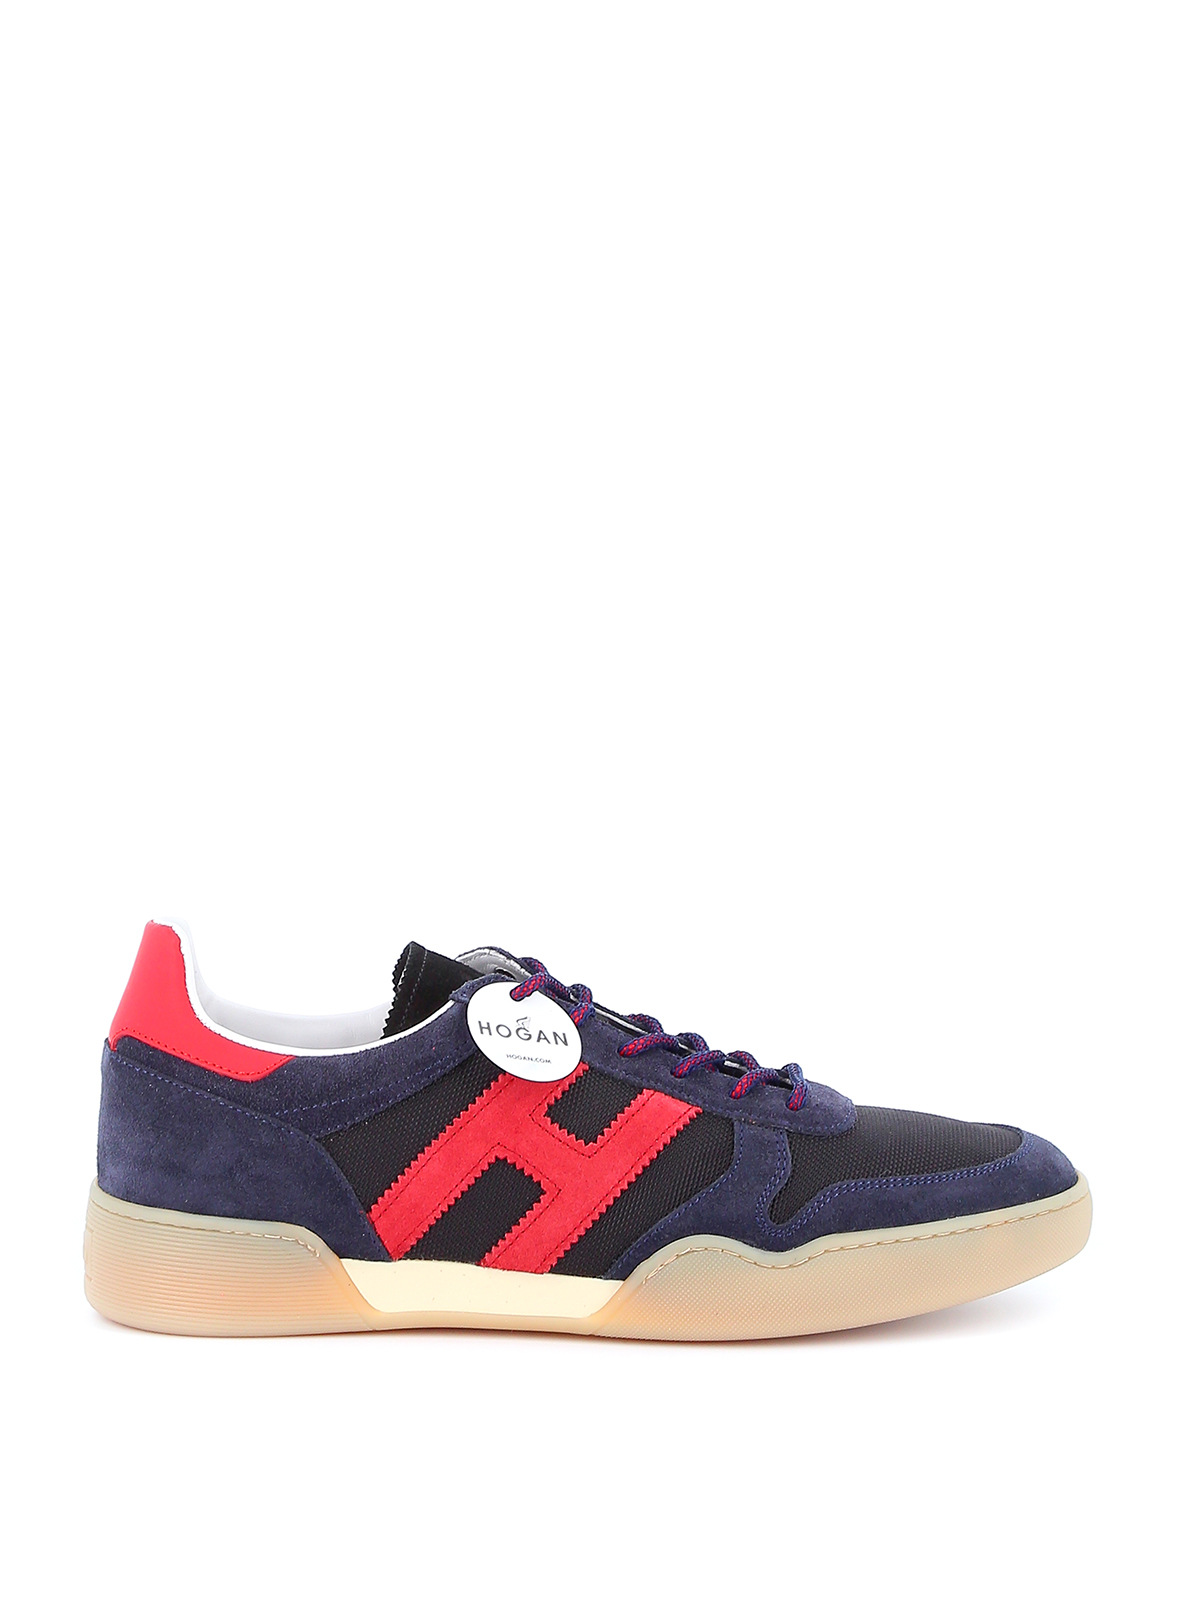 Hogan H357 Sneakers In Blue And Red In Grey | ModeSens